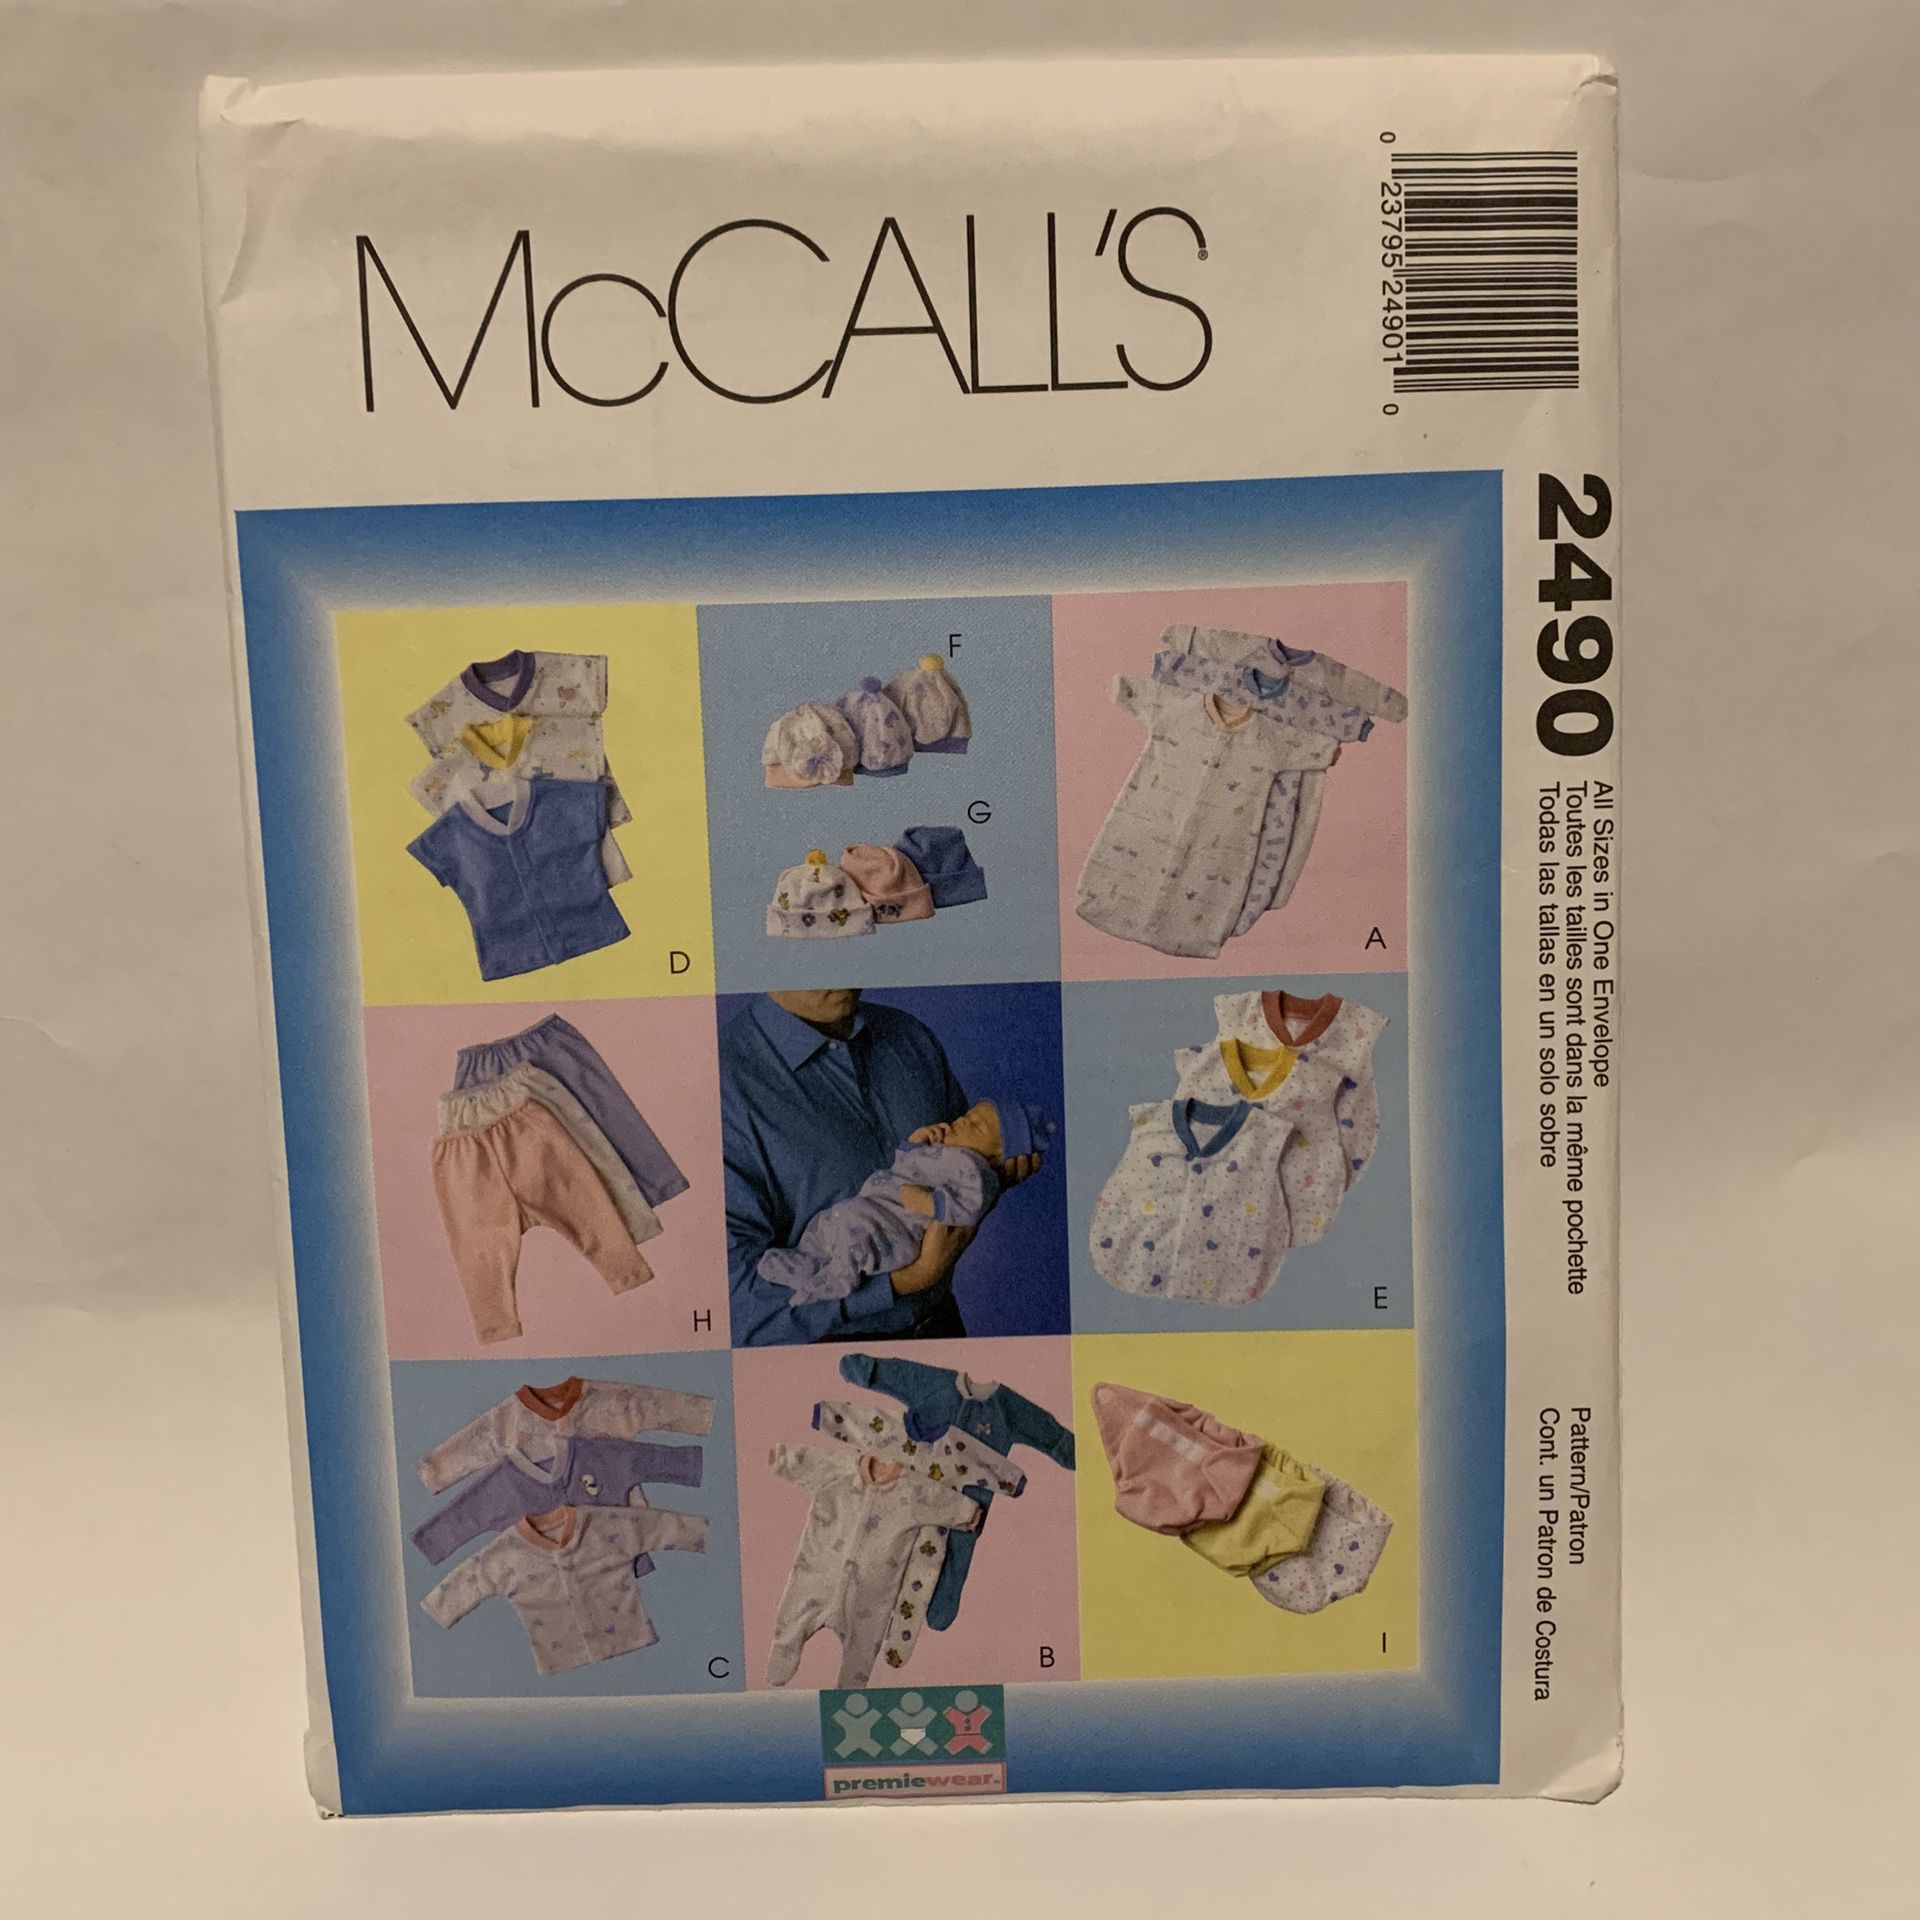 McCall's Pattern 2490 BABY LAYETTE Preemie Infants NB Gown Top Diaper Cover Hat